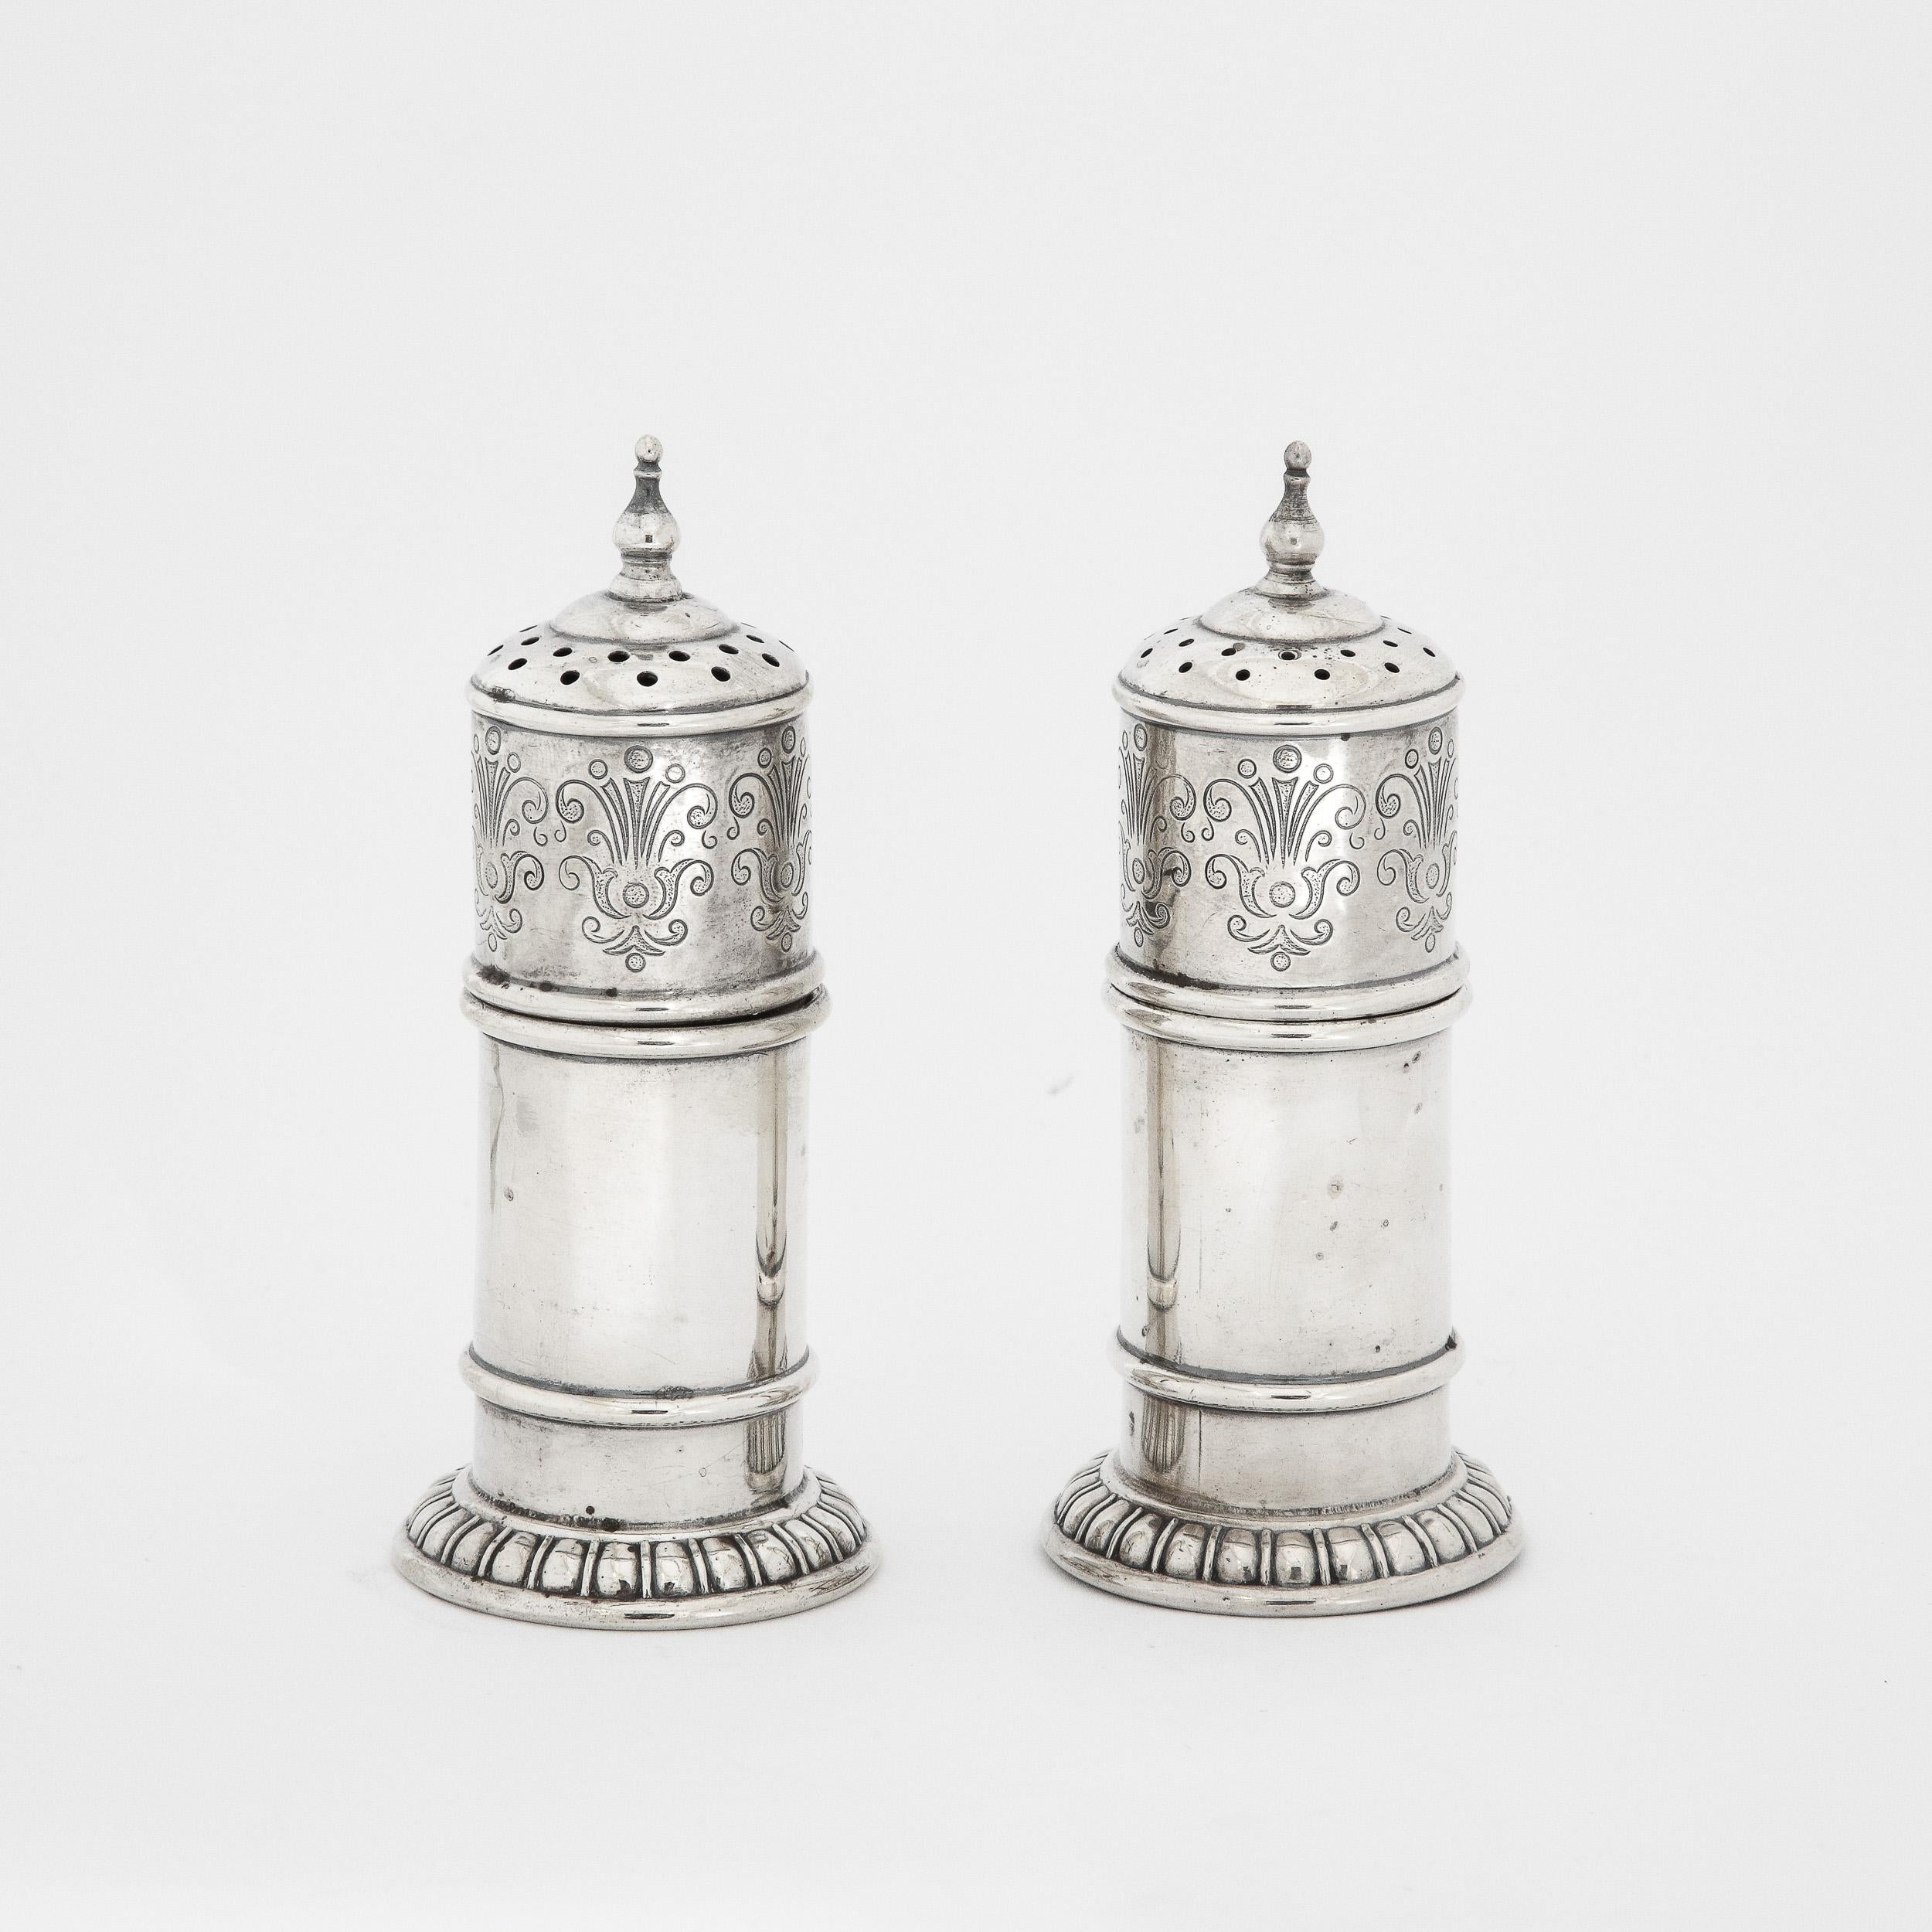 These stunning Art Deco Salt and Pepper Shakers originate from the United States, Circa 1930, and are executed  by the company Rogers, Lunt and Bowlen Co. The hand-chased detailing is beautifully precise, depicting geometrically stylized looping